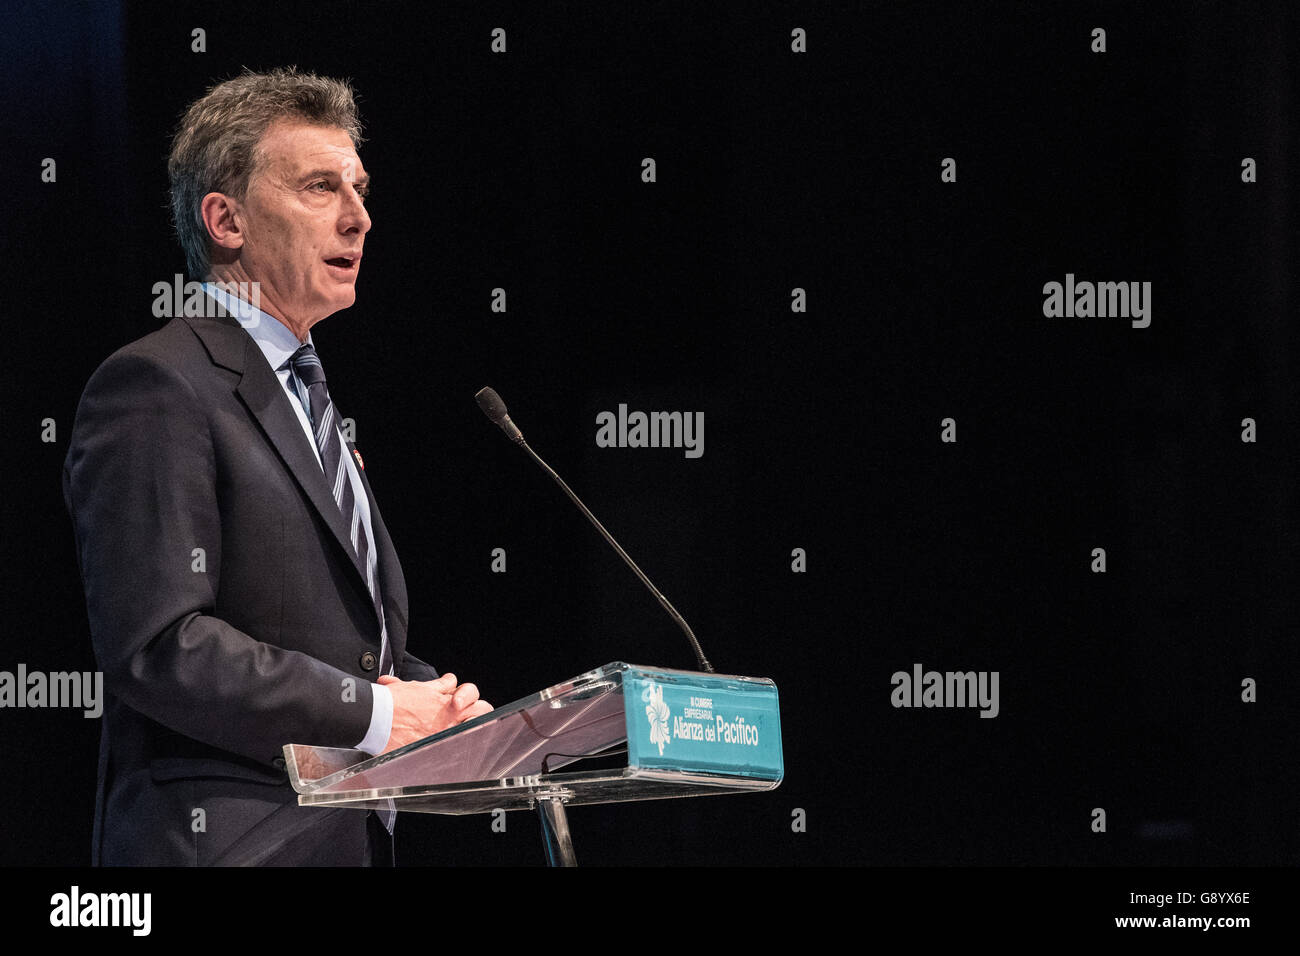 Frutillar, Chile. 30th June, 2016. Argentina's President Mauricio Macri delivers a speech during the 3rd Pacific Alliance Business Summit in Frutillar City, Chile, on June 30, 2016. © Jorge Villegas/Xinhua/Alamy Live News Stock Photo